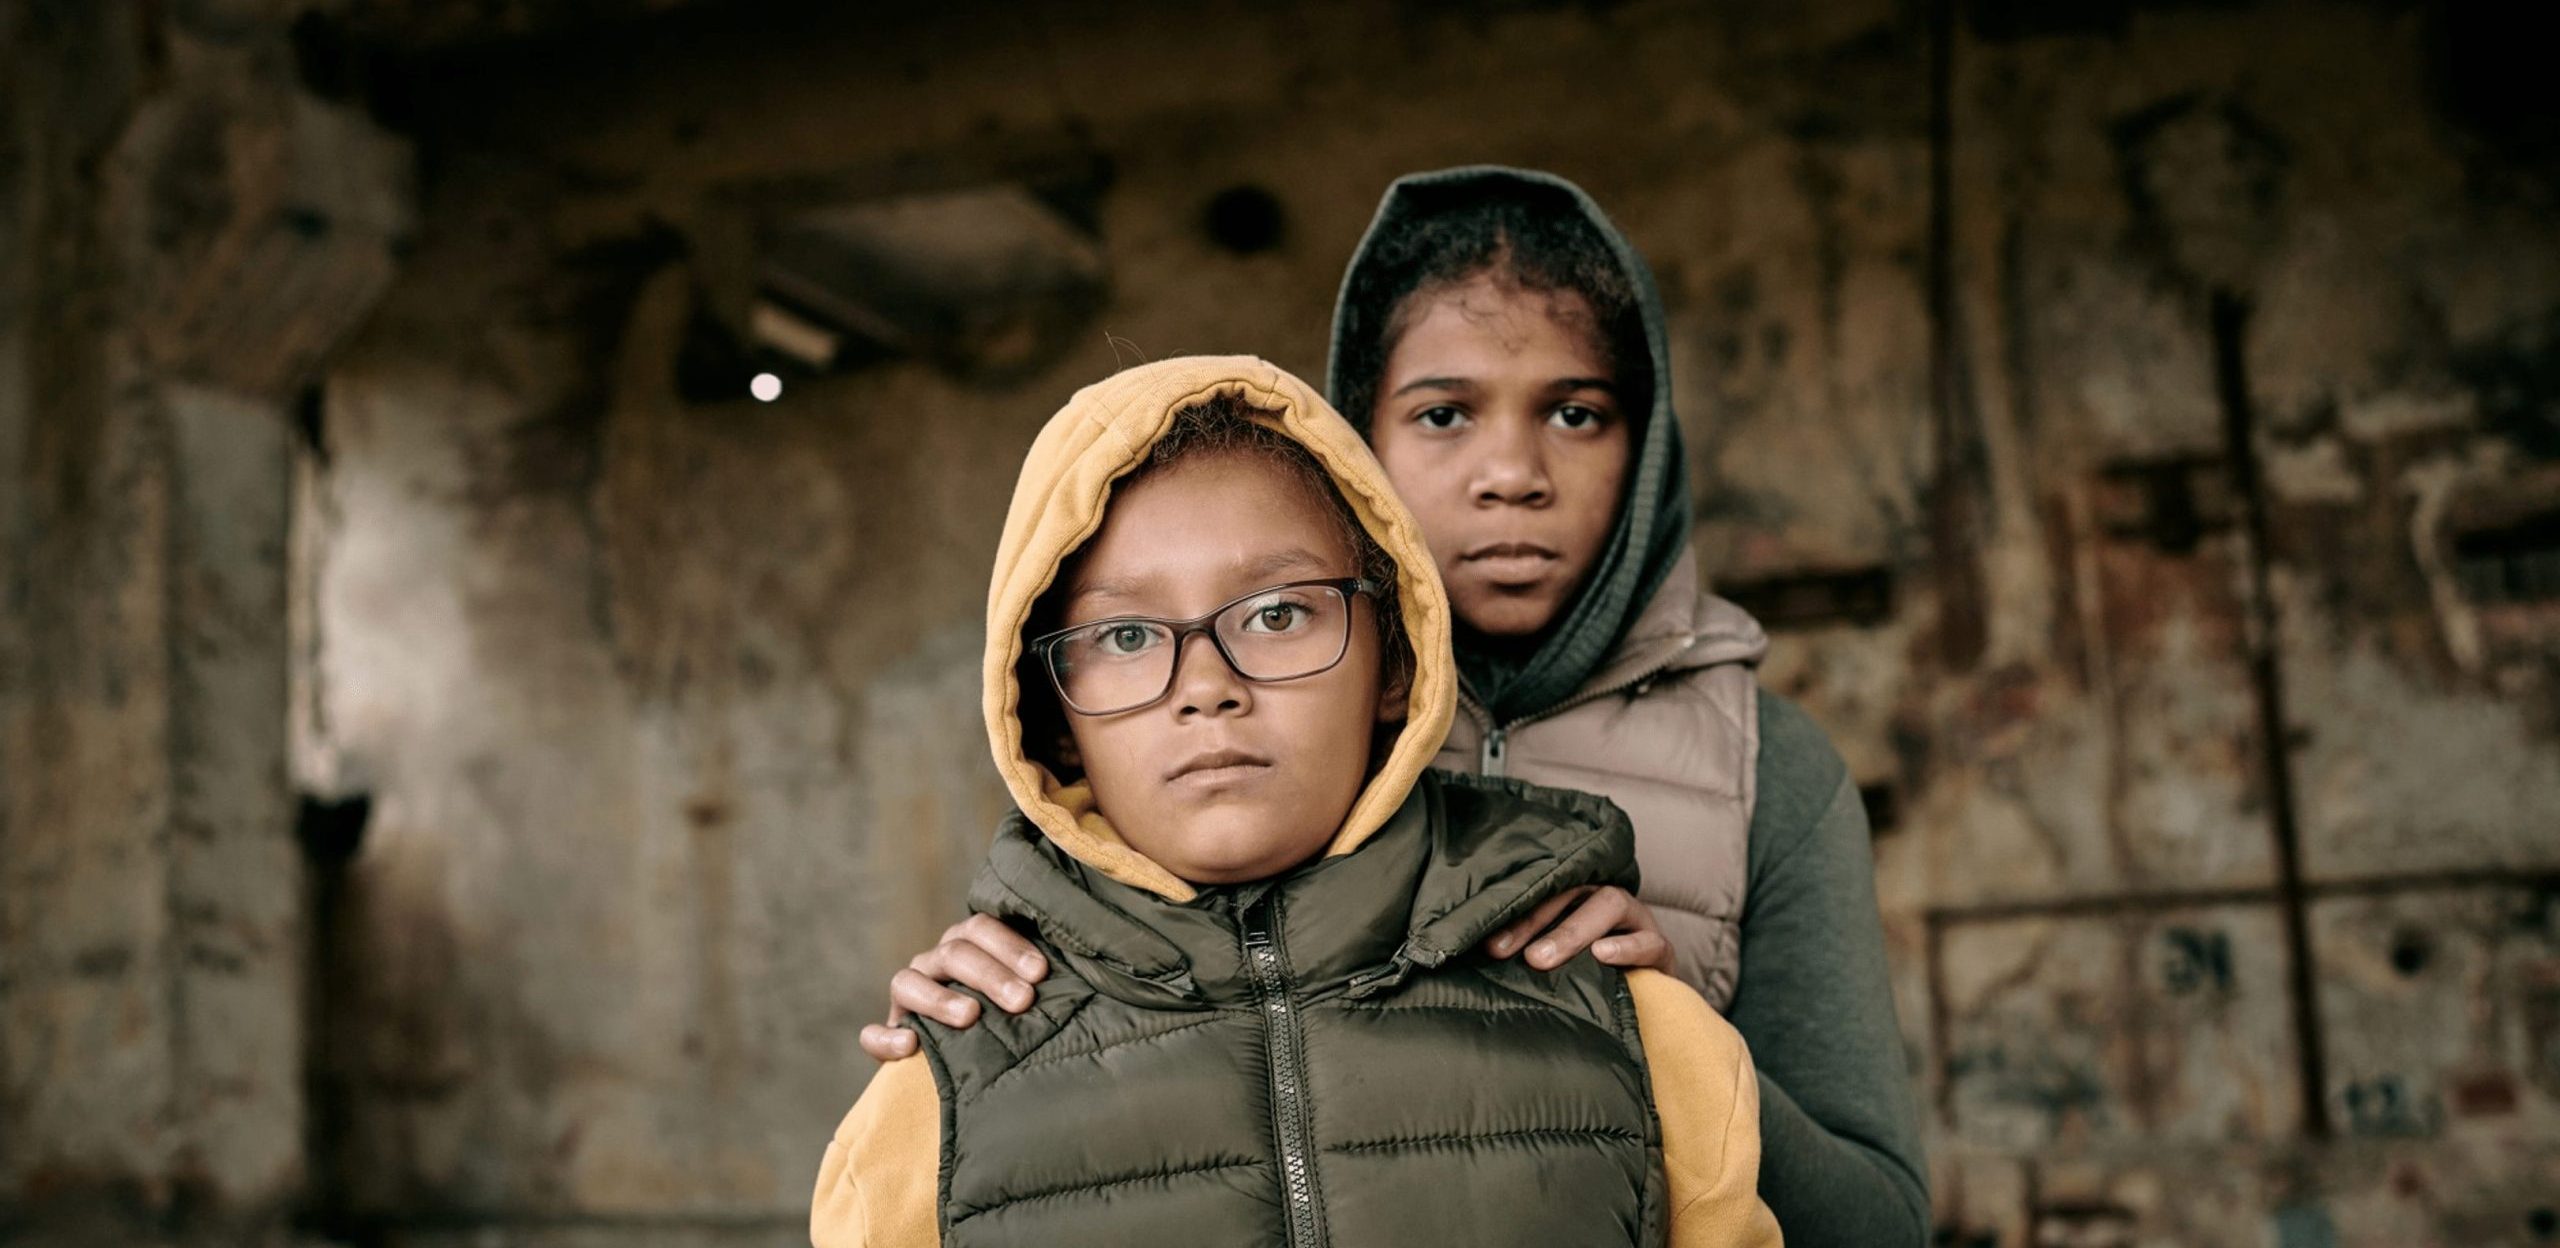 https://cityofrefugecolumbia.org/wp-content/uploads/2023/04/portrait-two-sisters-hoodies-standing-inside-abandoned-house-they-left-alone-after-hostilities-scaled-e1681212073858.jpg